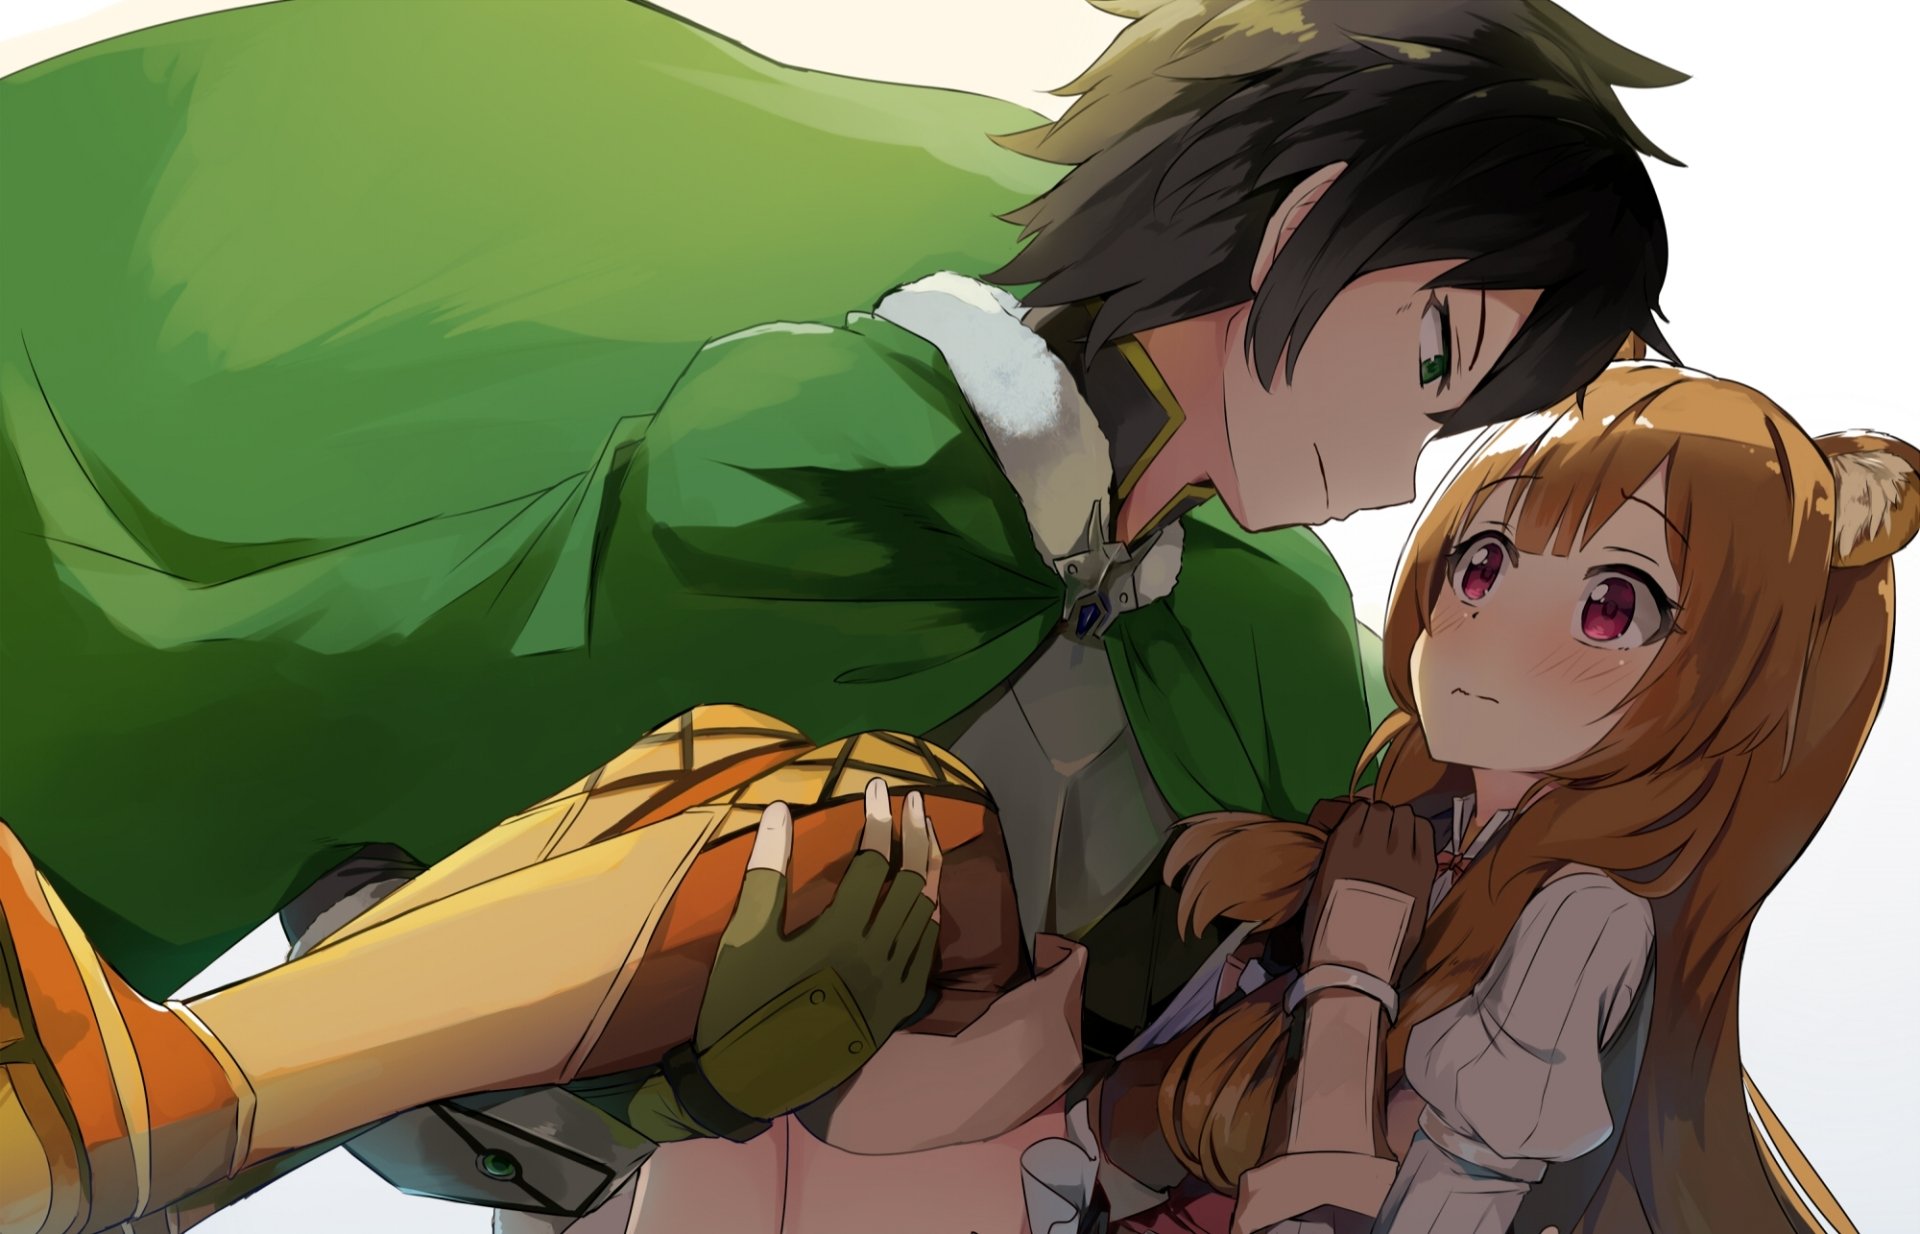 The Rising of the Shield Hero HD Wallpaper by セ ネ ト.